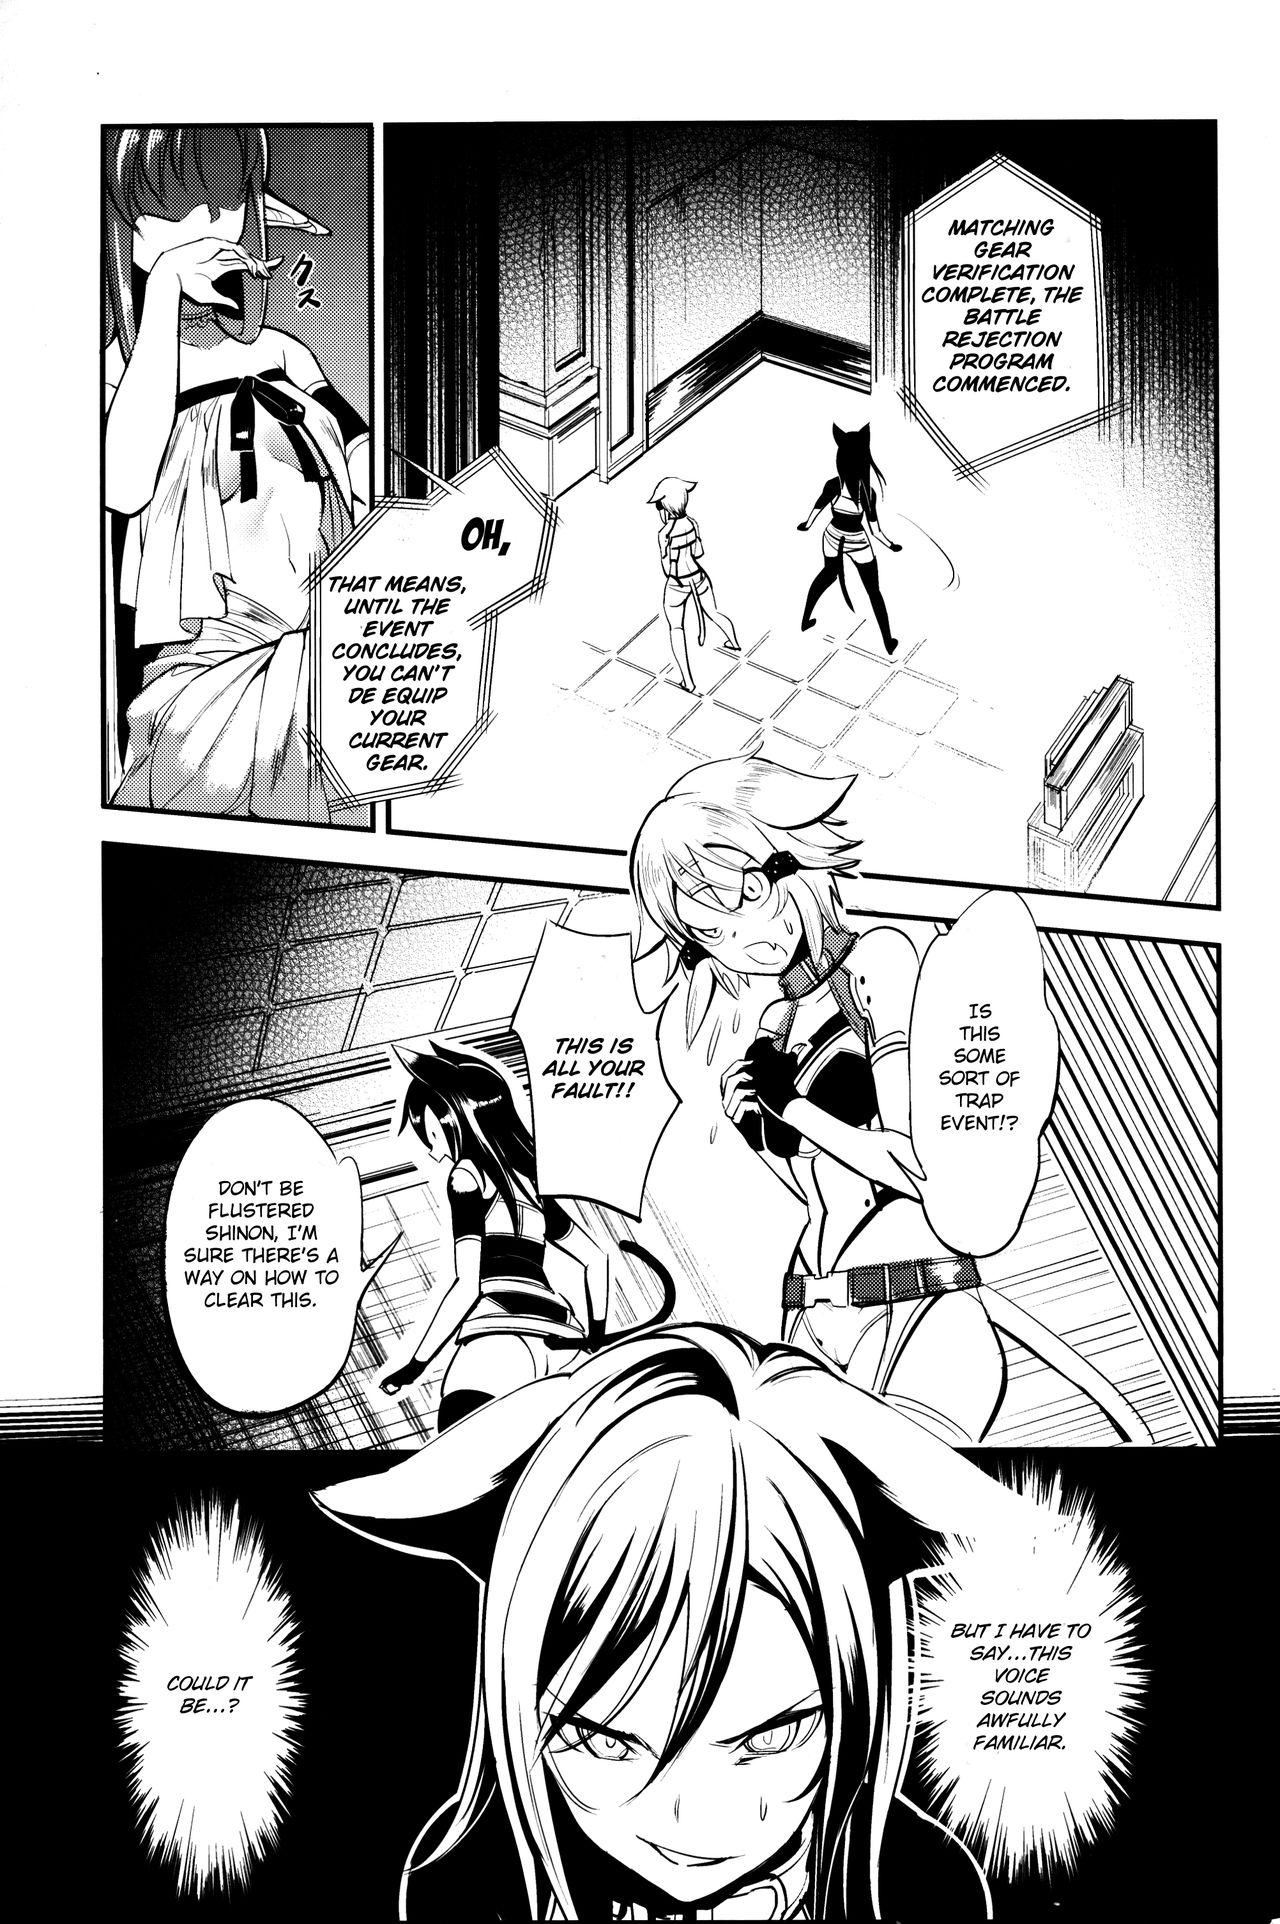 Mediumtits MONSTER HOUSE QUEST - Sword art online Foursome - Page 4